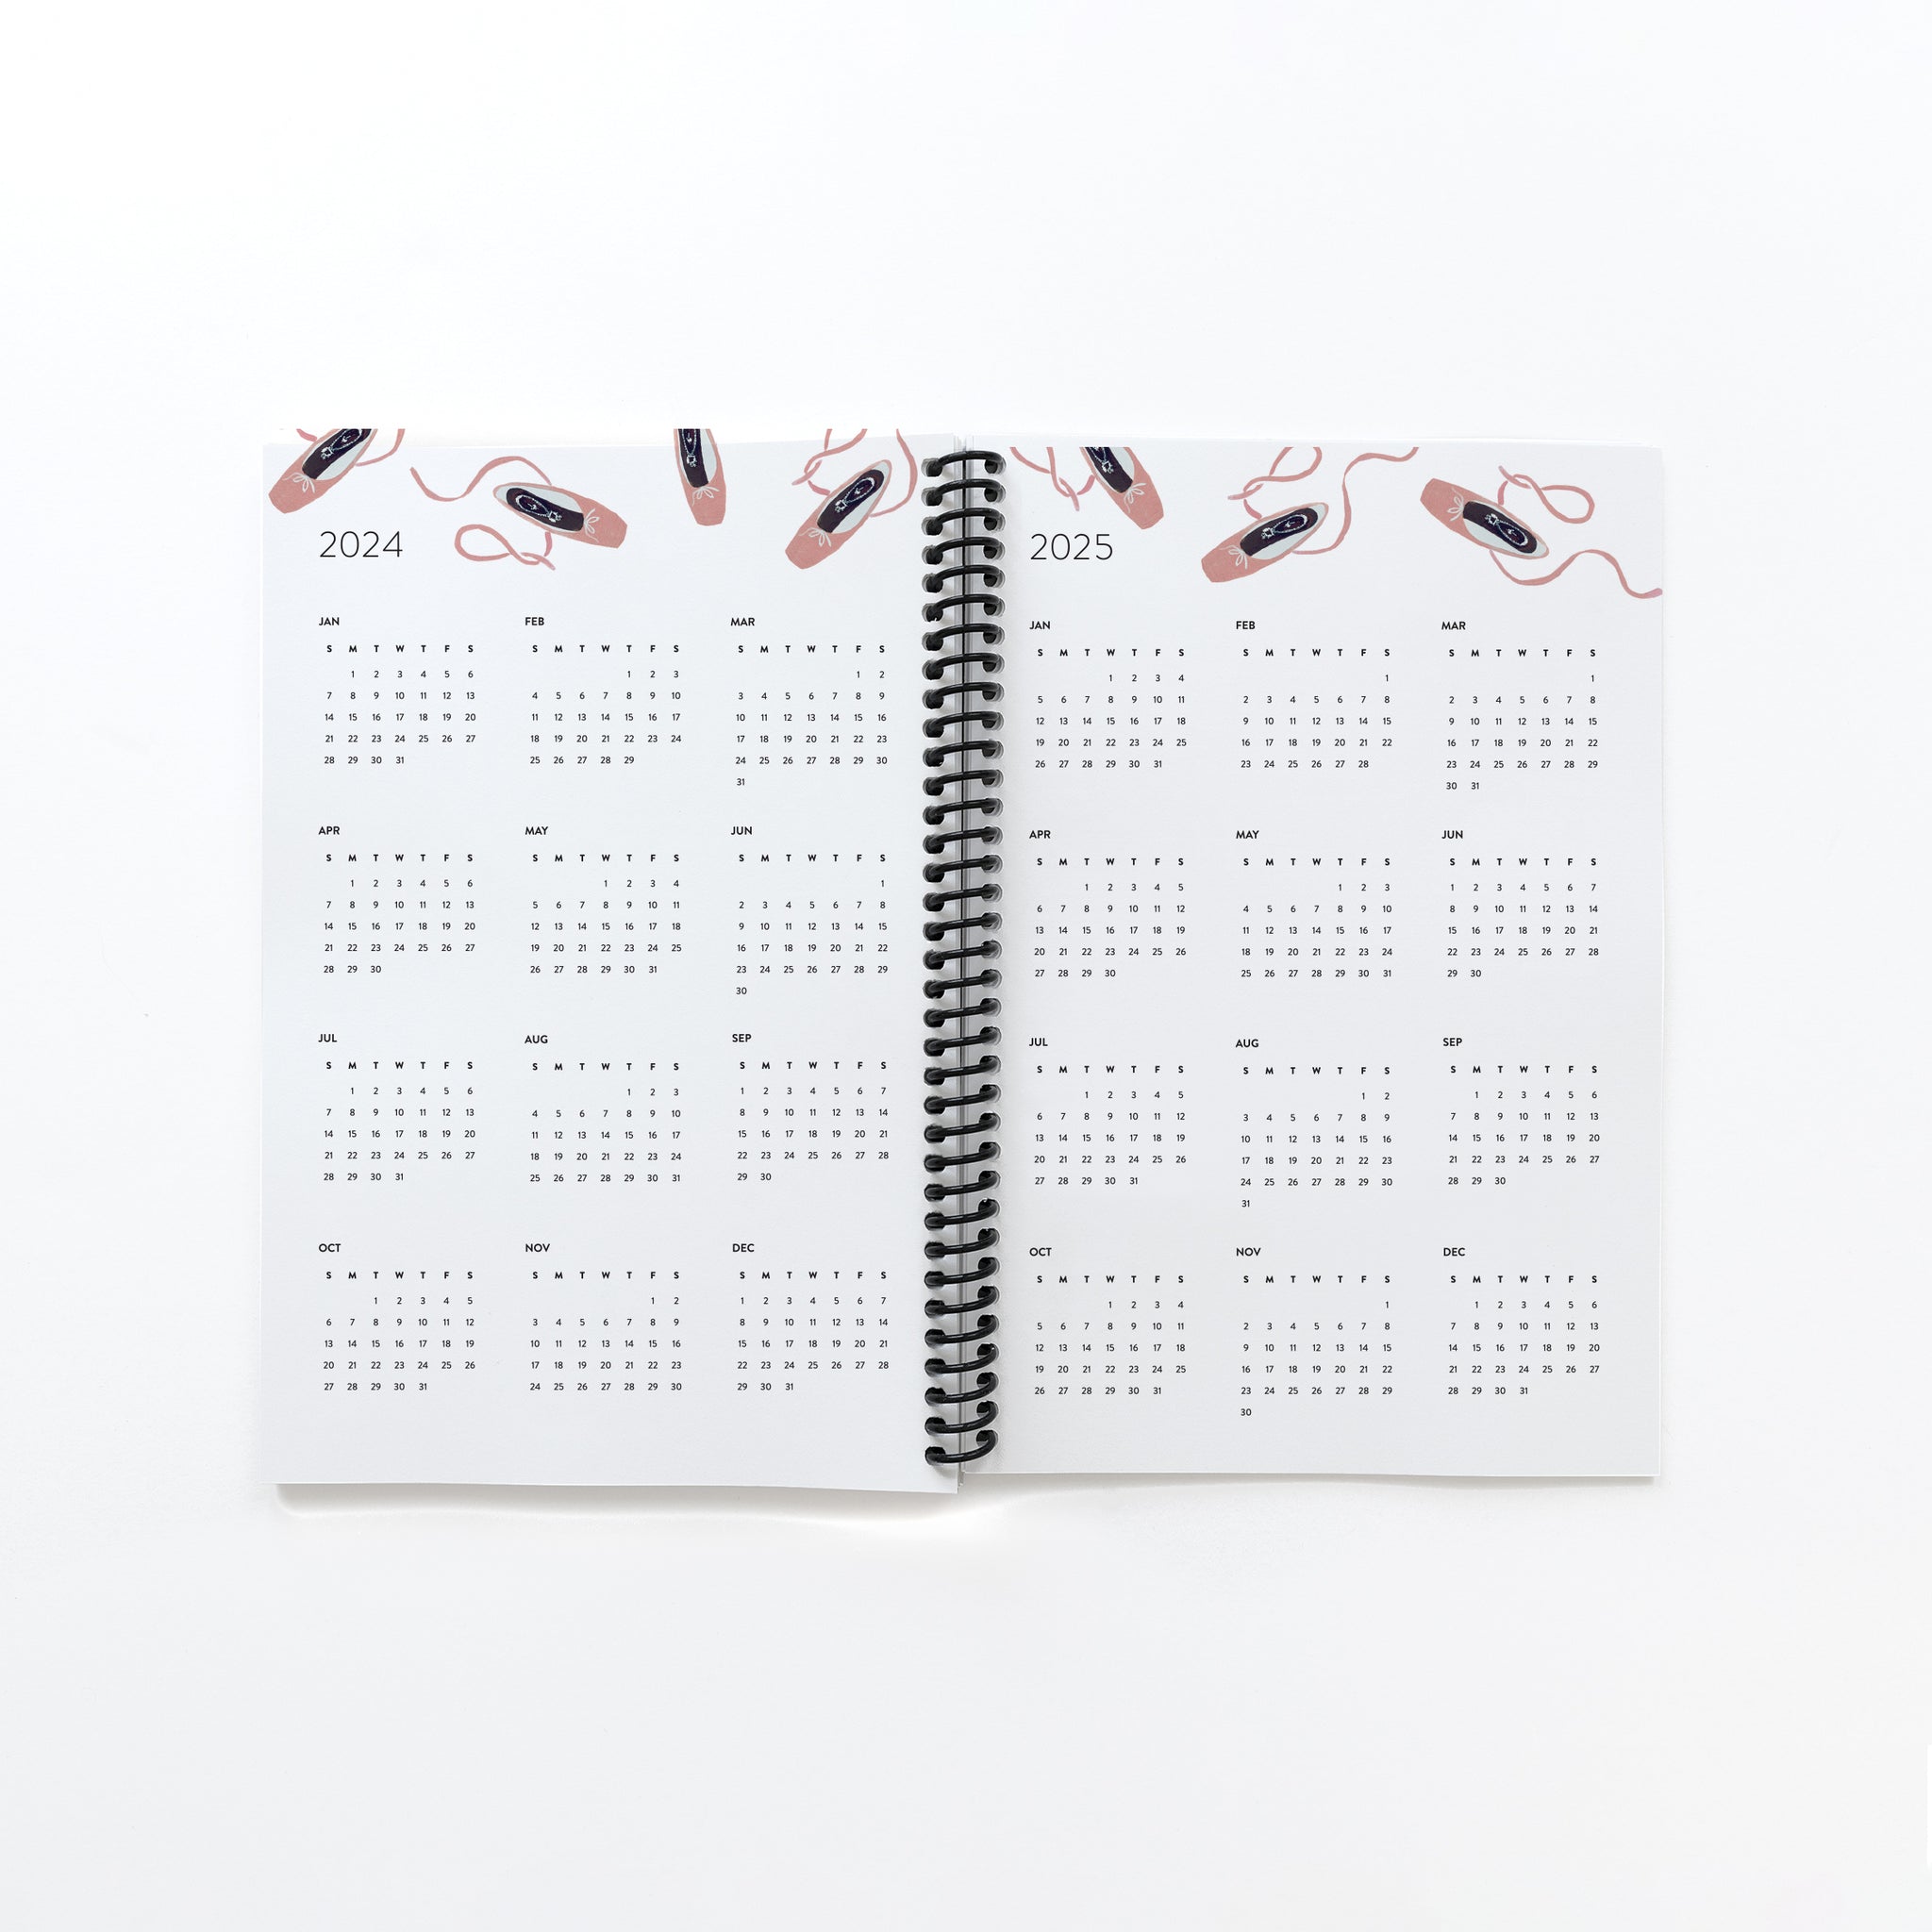 The Great Ballets 2024 Planner